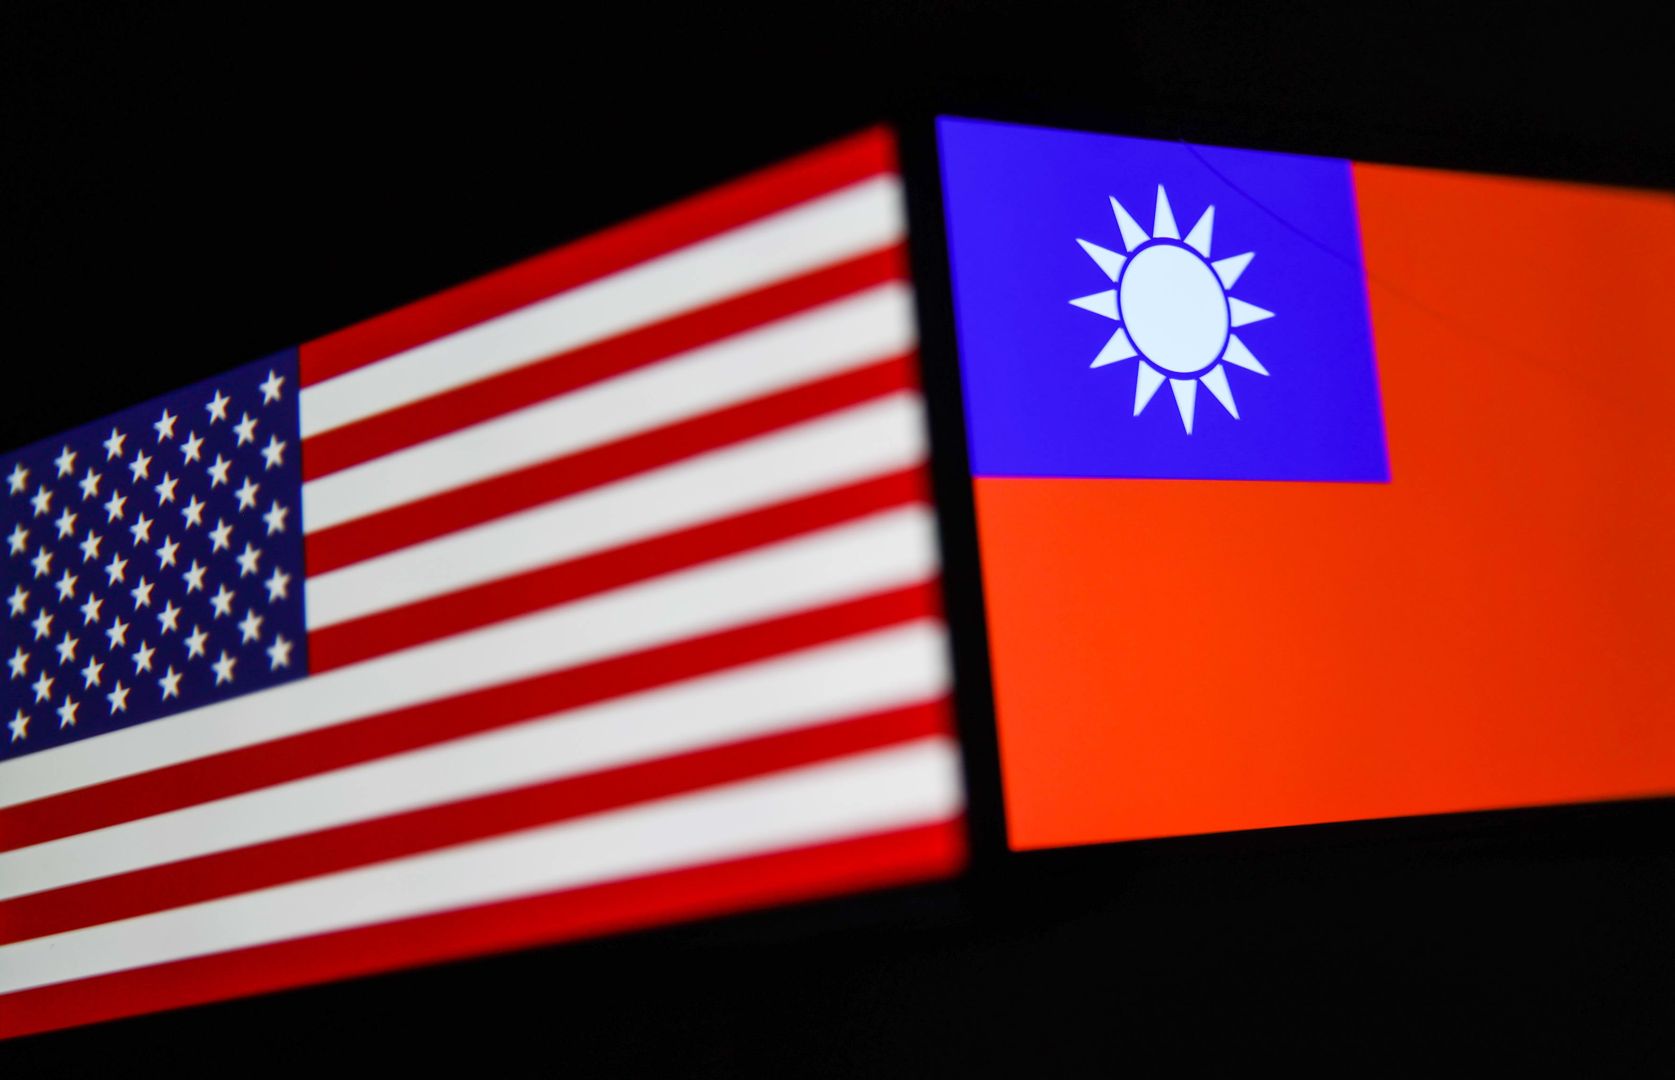 United States looks forward to working with Taiwan to promote common values